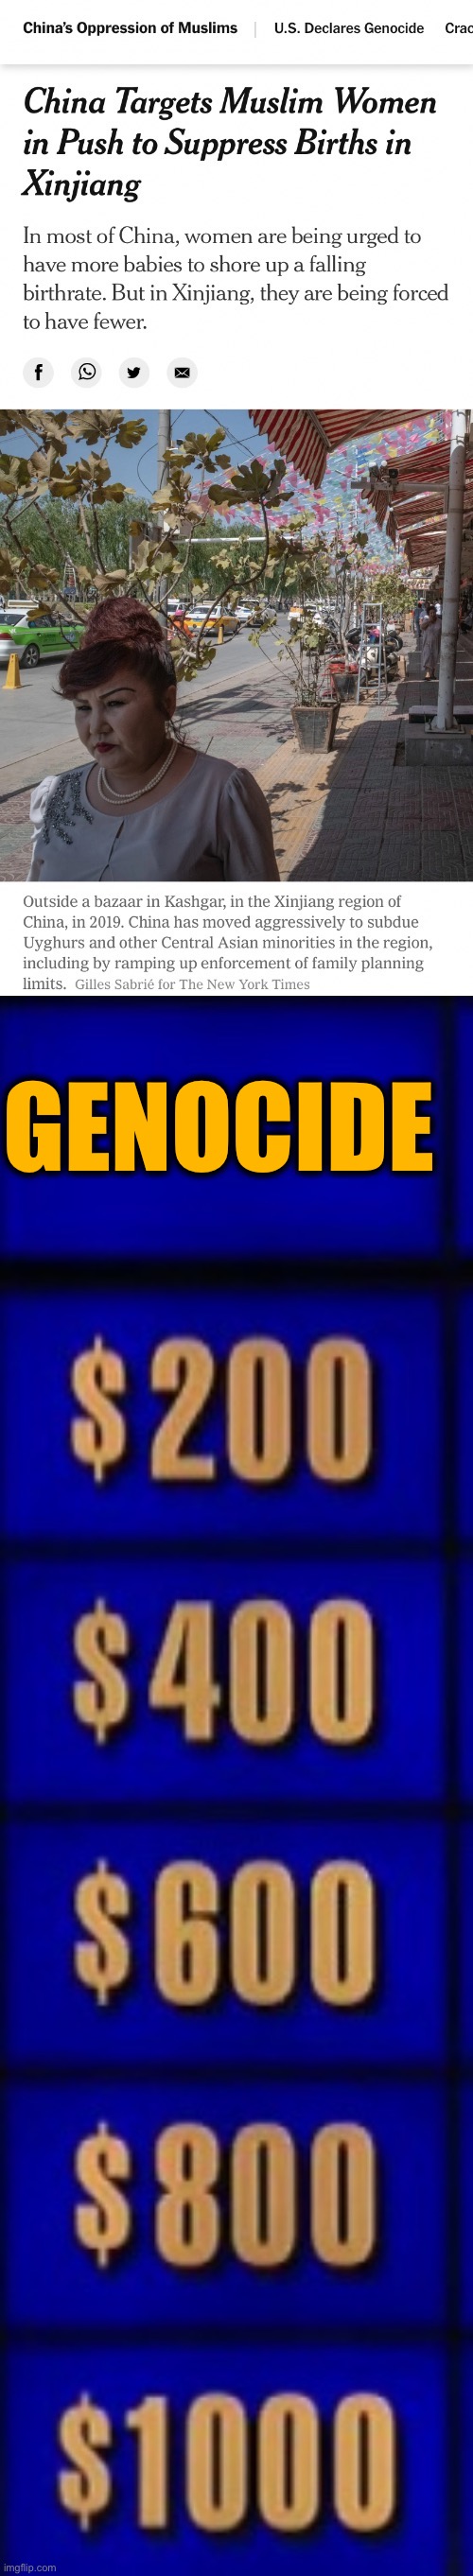 I’ll take Genocide for $1000 | GENOCIDE | image tagged in xinjiang genocide,jeopardy category,genocide,sexism,sexist,china | made w/ Imgflip meme maker